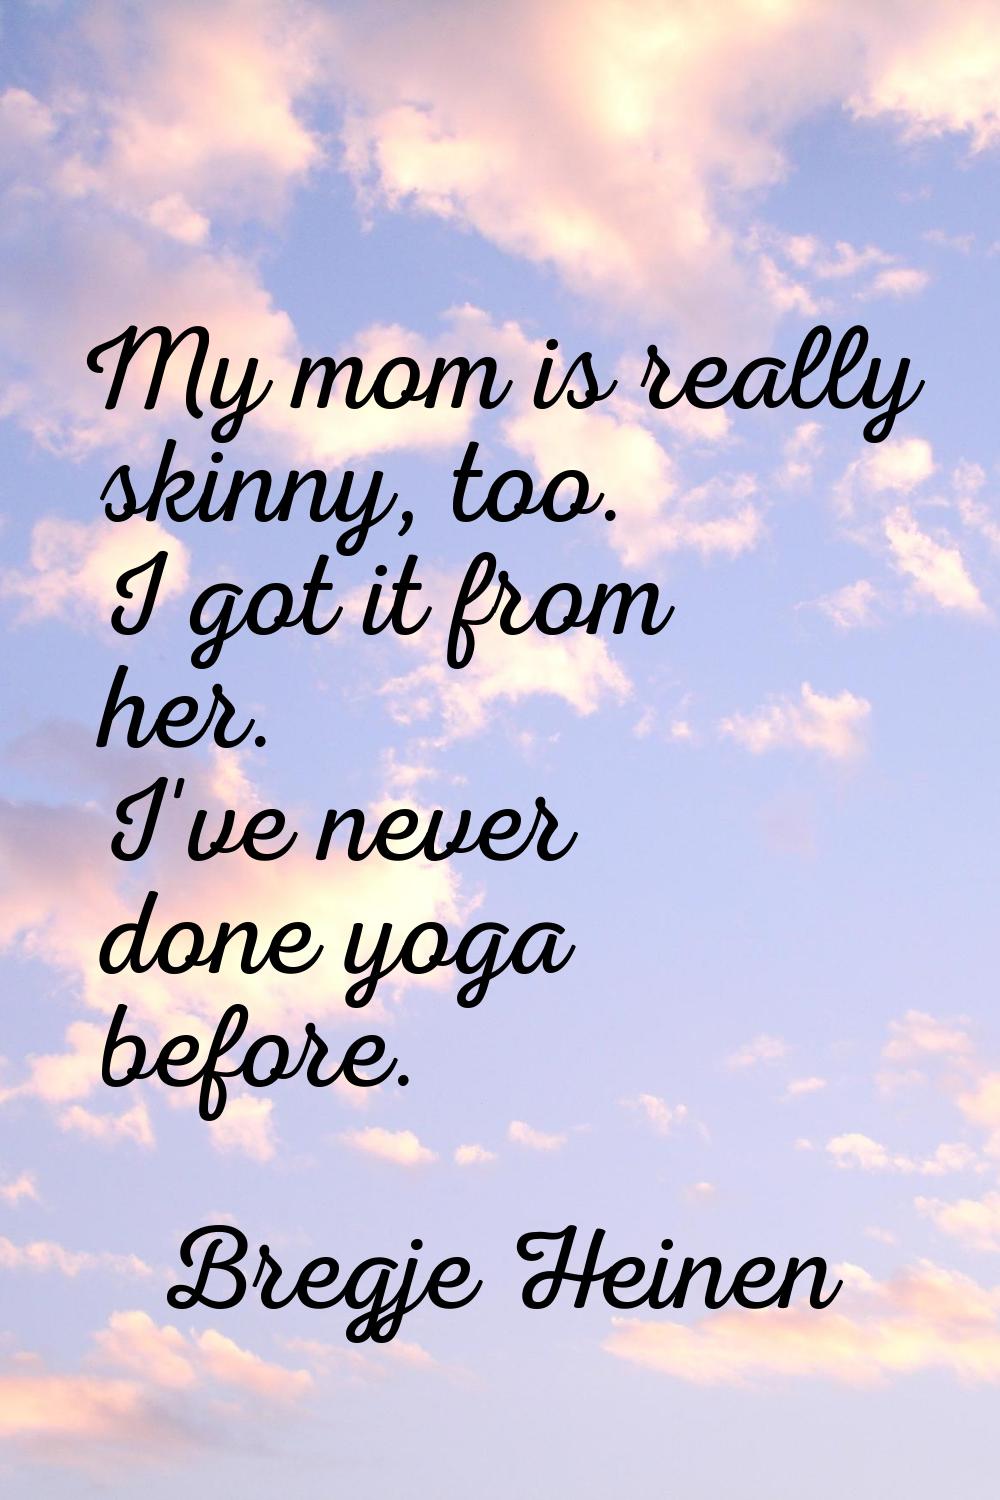 My mom is really skinny, too. I got it from her. I've never done yoga before.